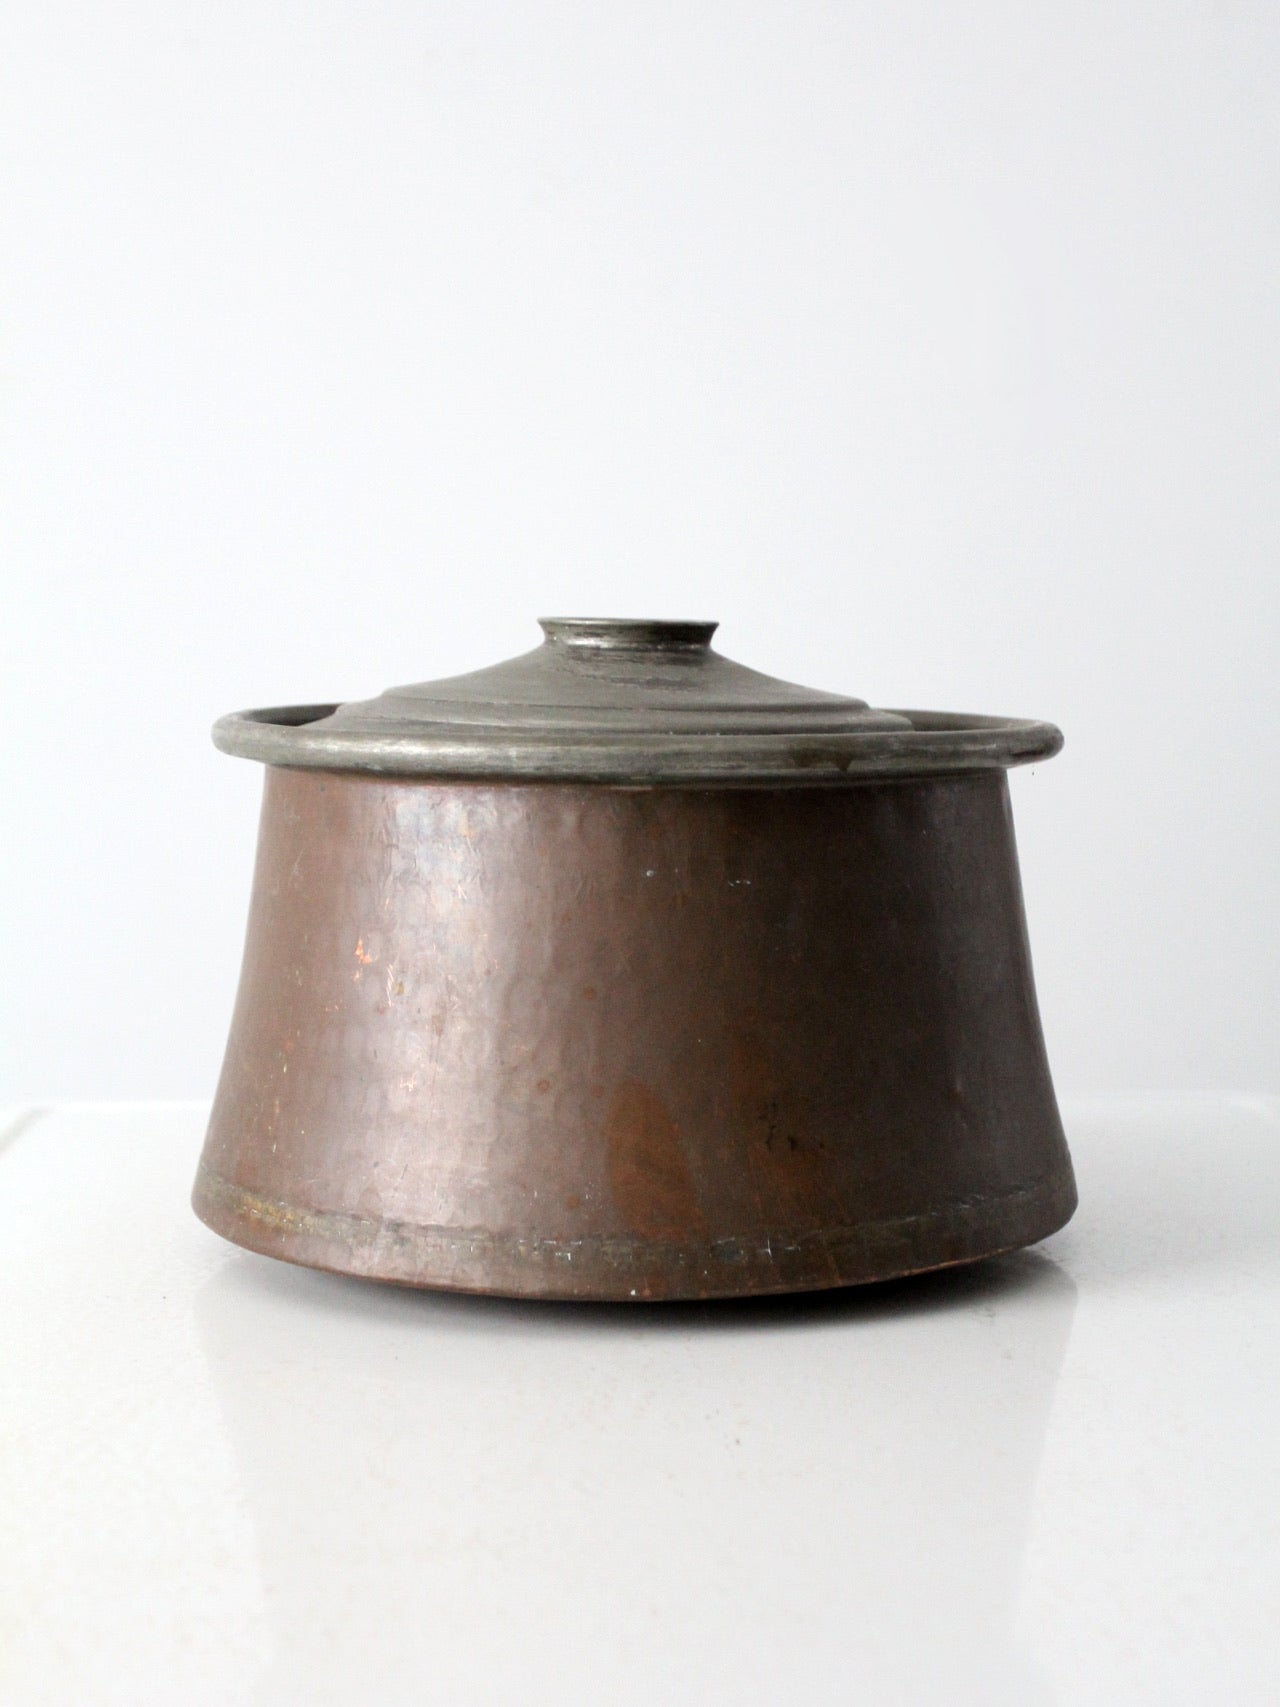 Rounded Copper Saucepan with Lid